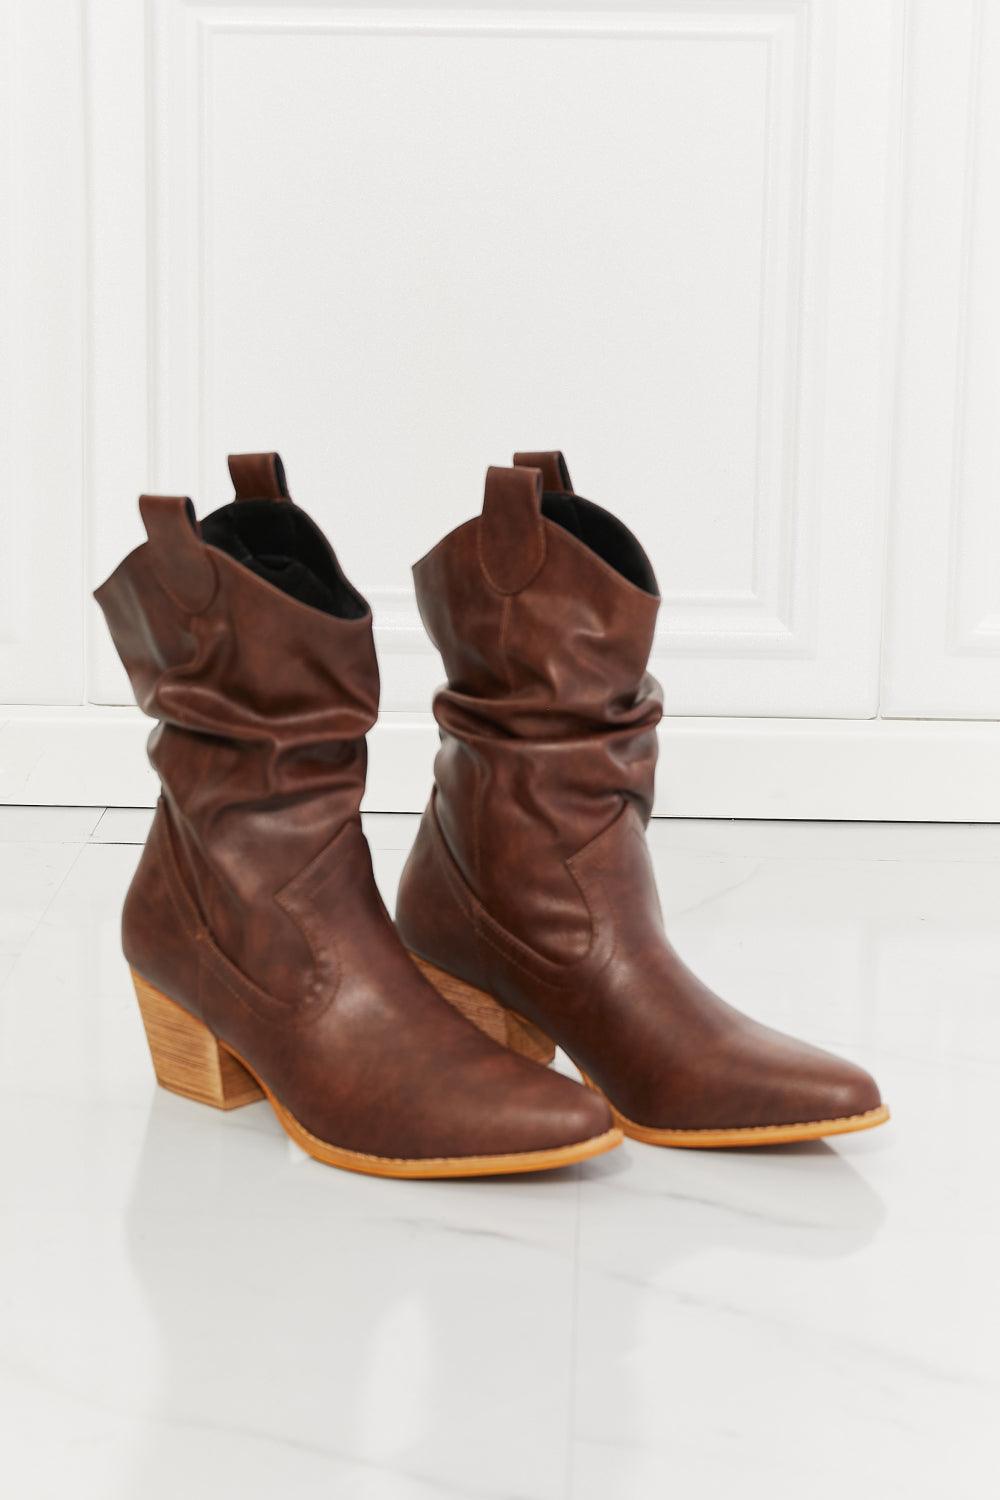 MMShoes Better in Texas Scrunch Cowboy Boots in Brown - Lab Fashion, Home & Health